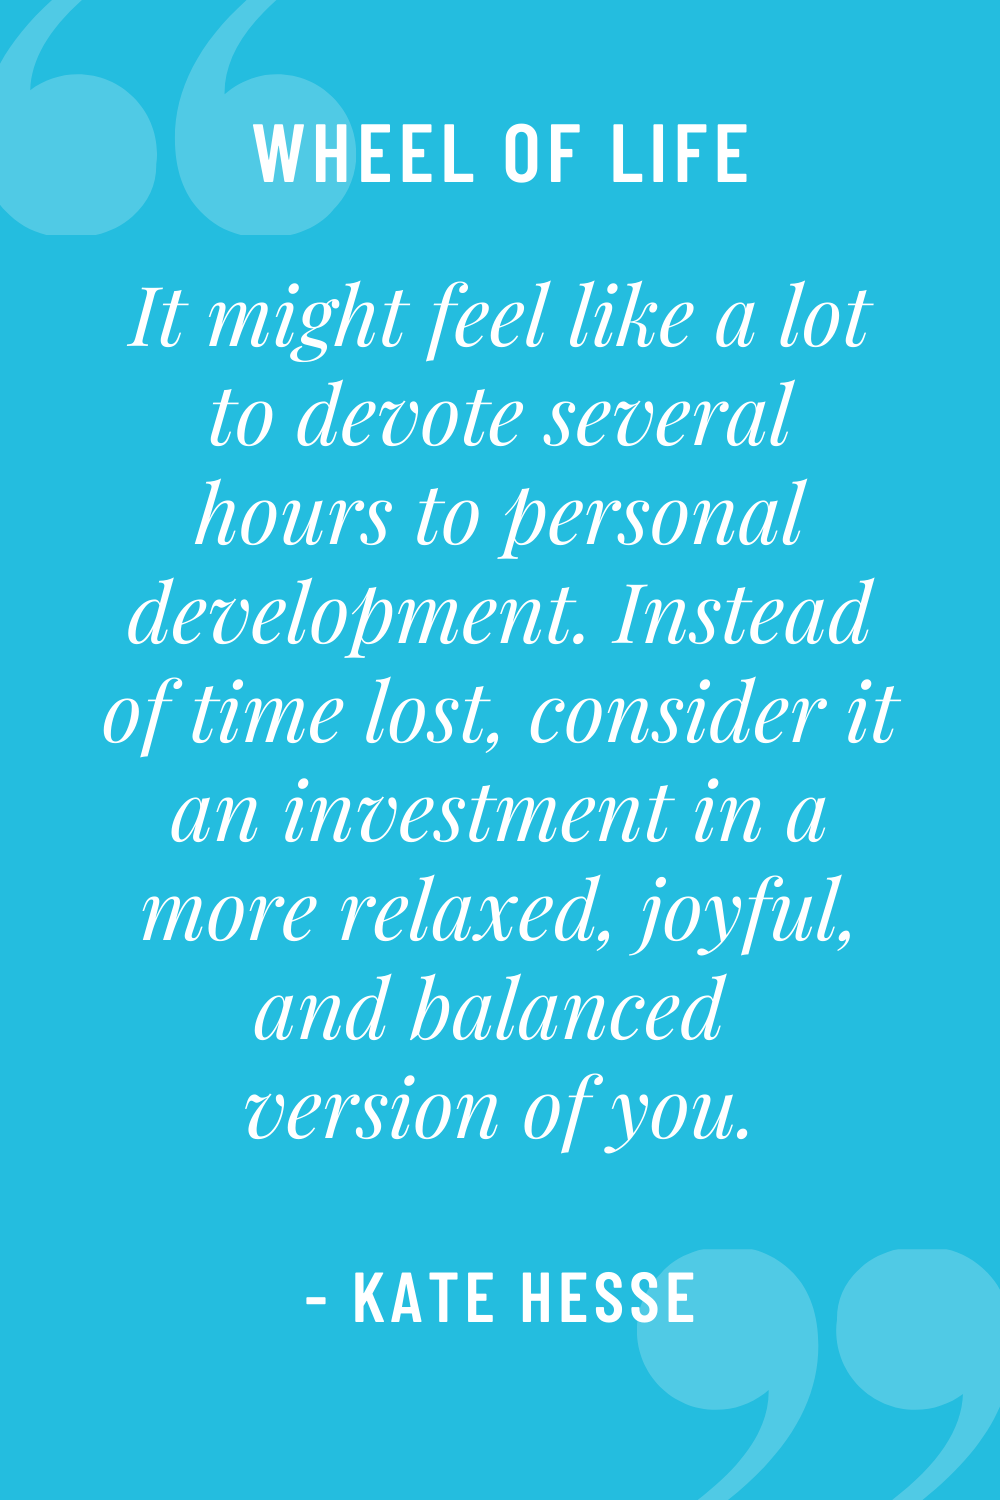 It might feel like a lot to devote several hours to personal development. Instead of time lost, consider it an investment in a more relaxed, joyful, and balanced version of you!